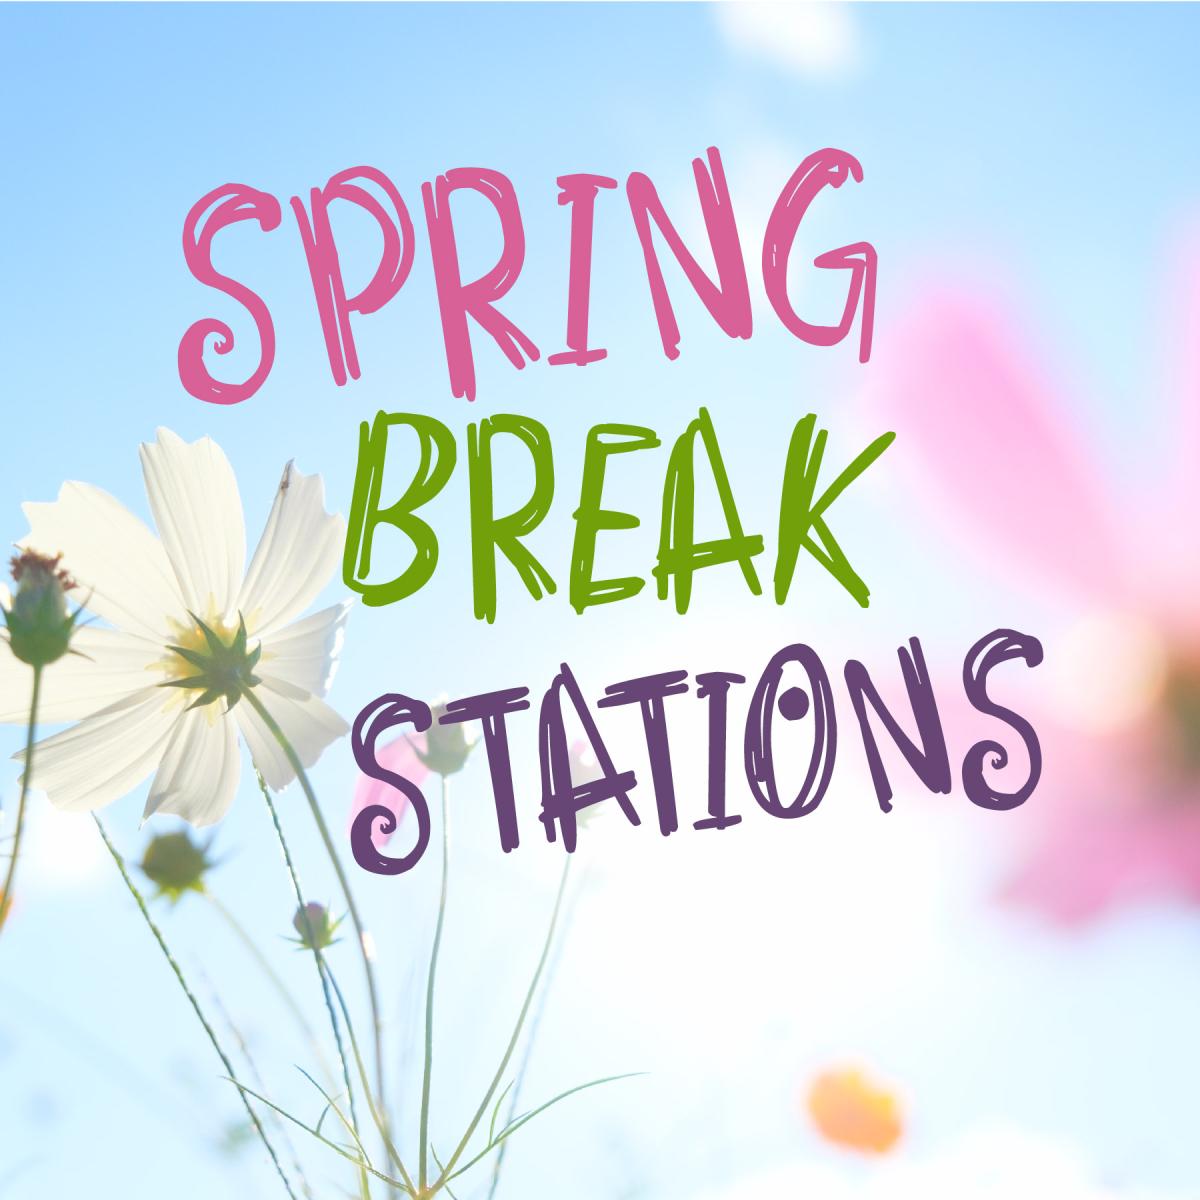 Flower background with "Spring Break Stations" text